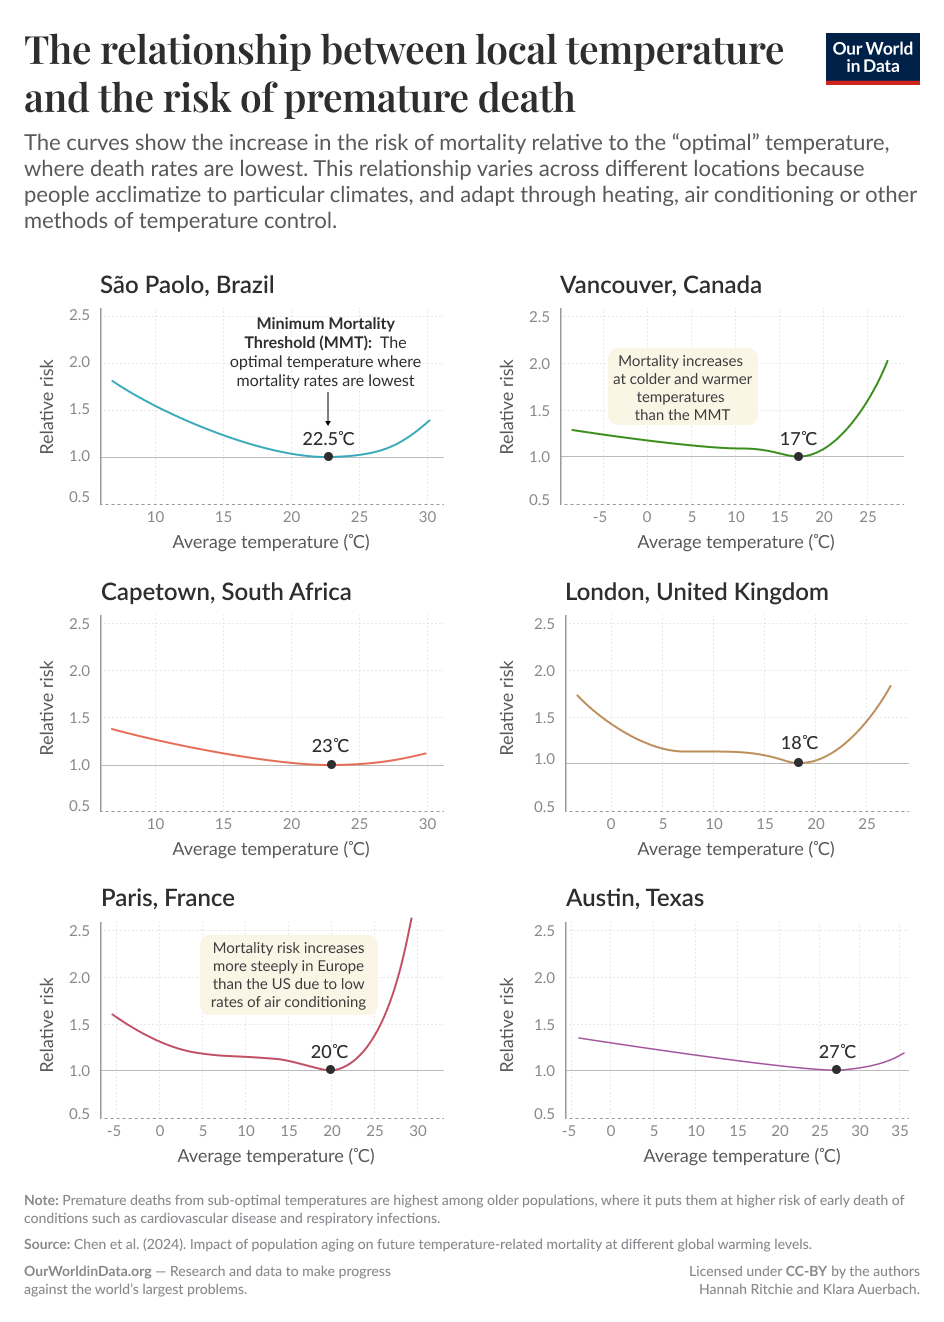 Curves showing how mortality risk is related to temperature across a range of locations